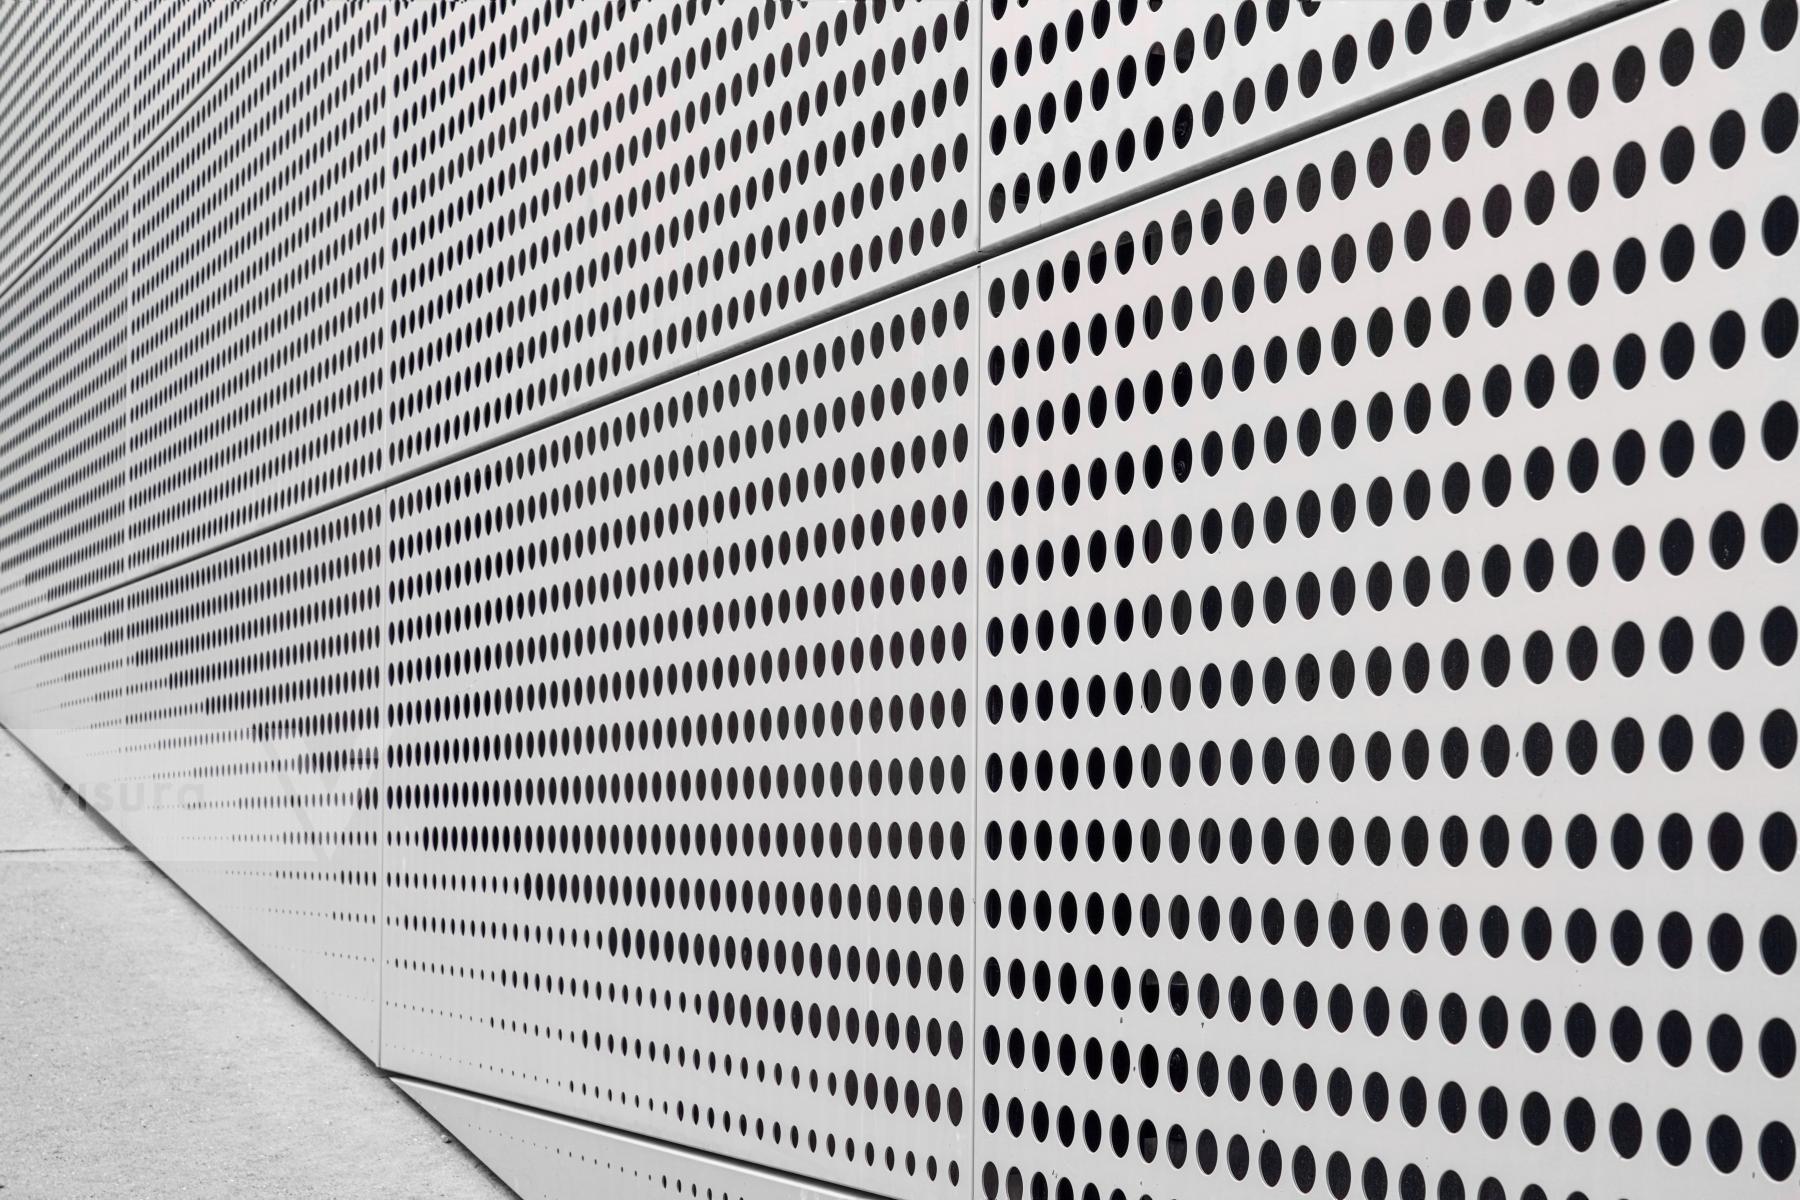 Purchase Perforated Performance: A mesmerizing Pattern of Dots by Michael Nguyen